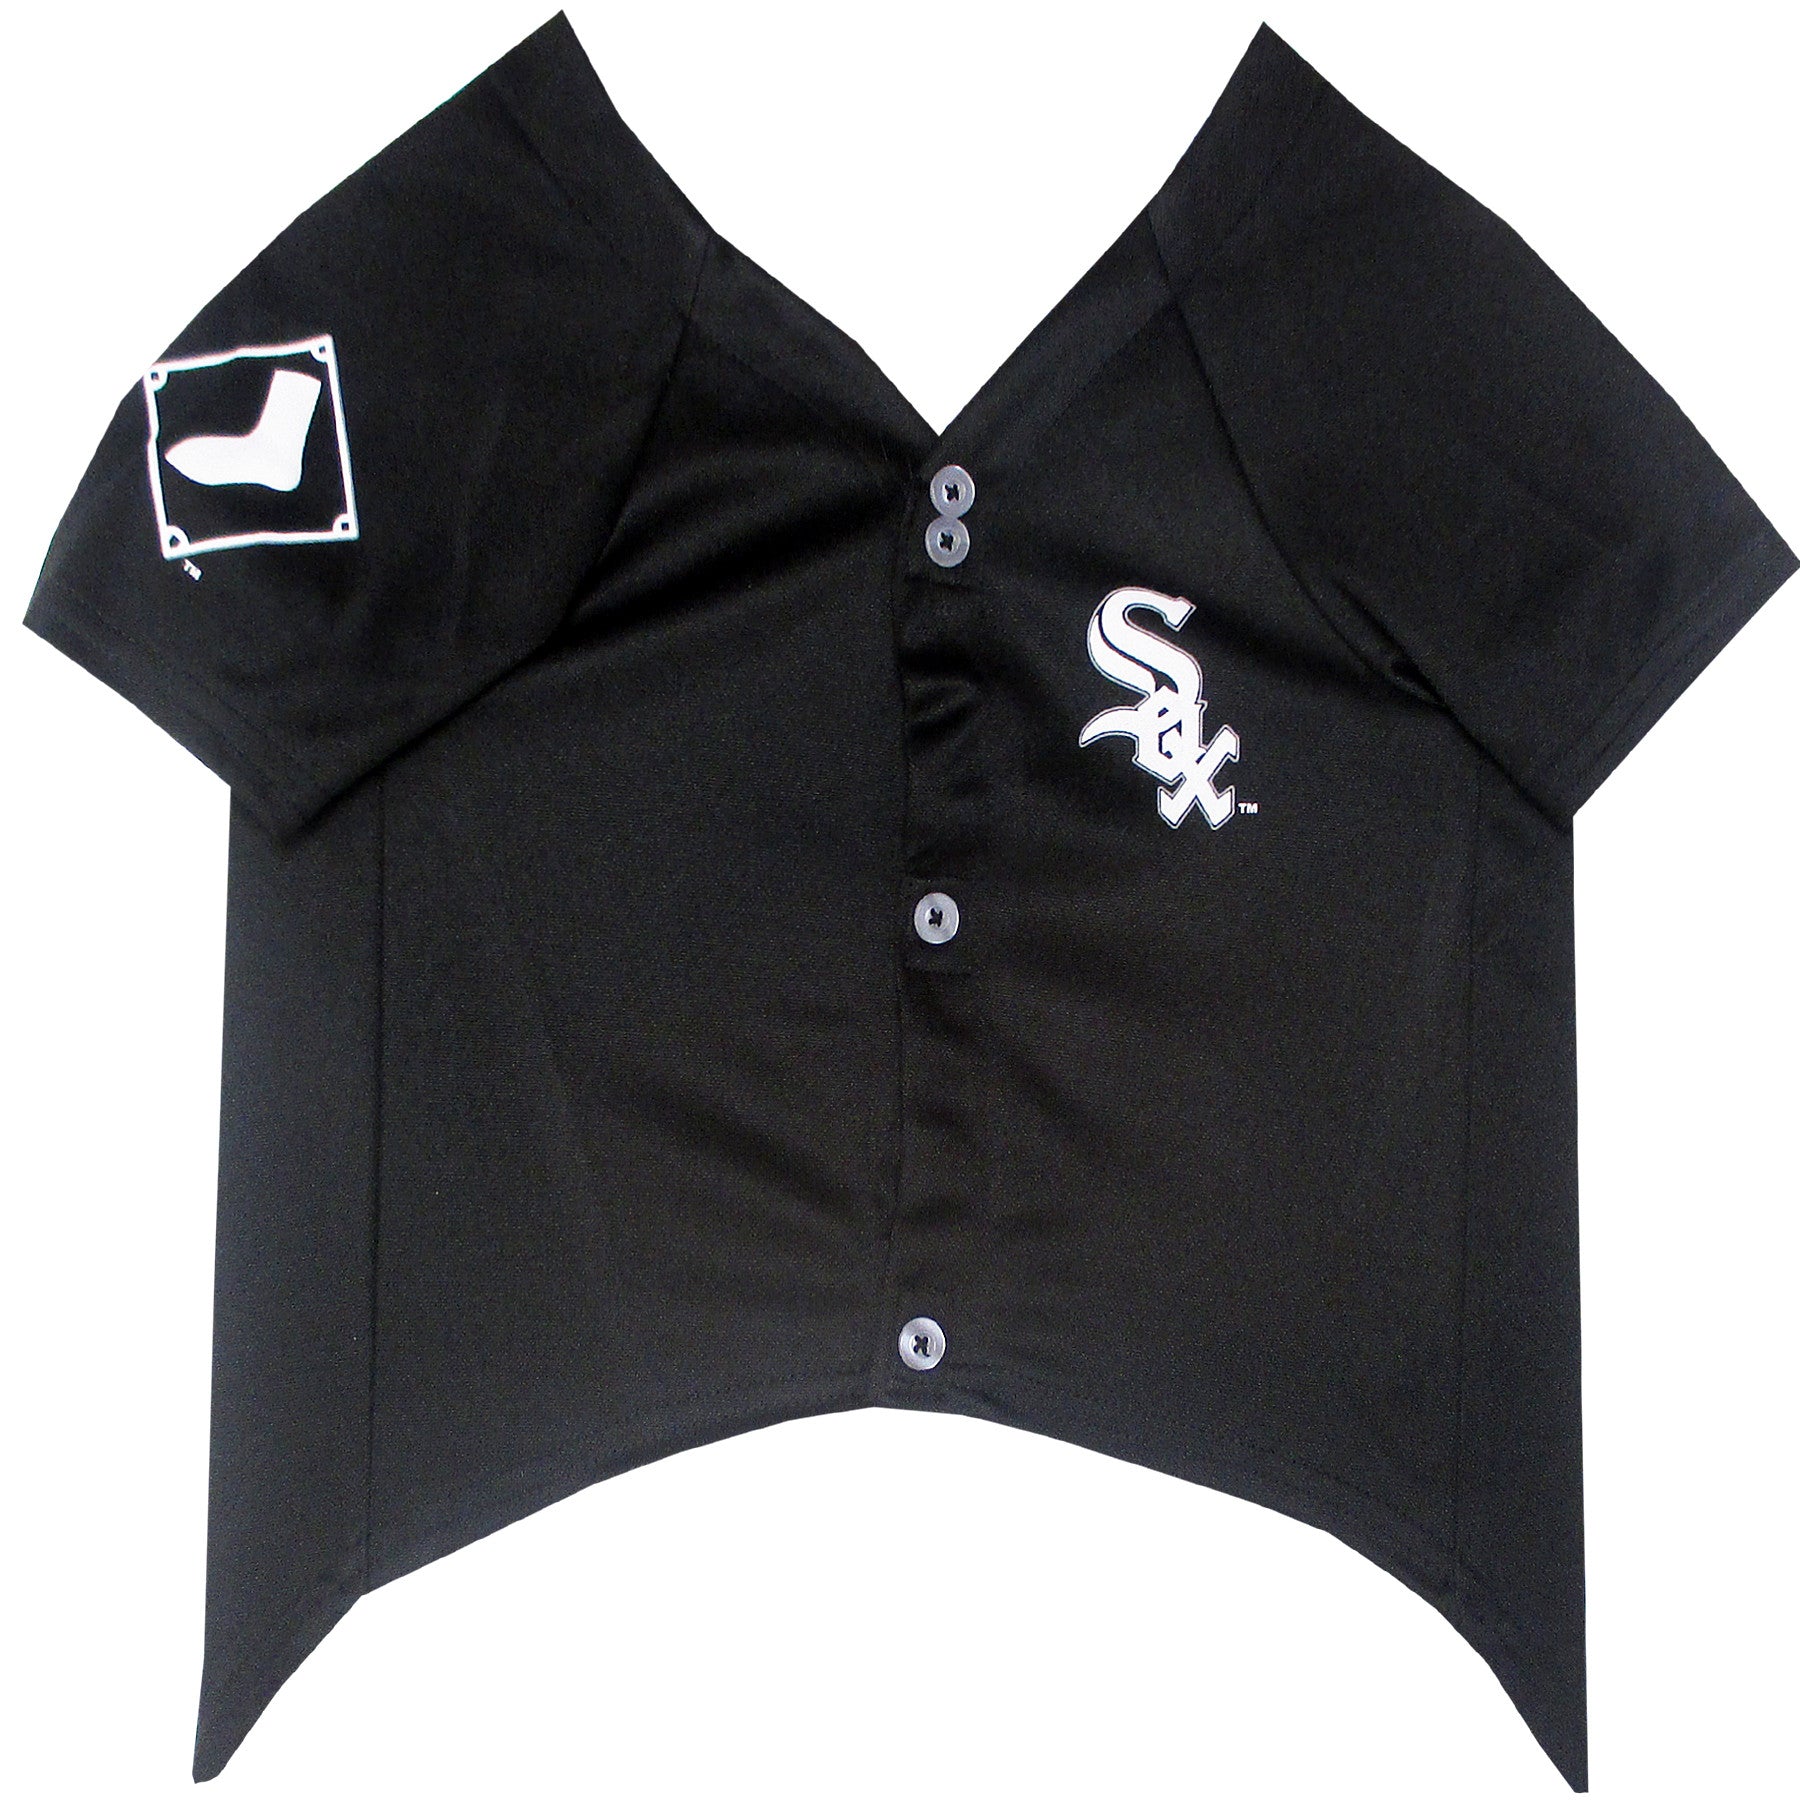 chicago white sox dog jersey